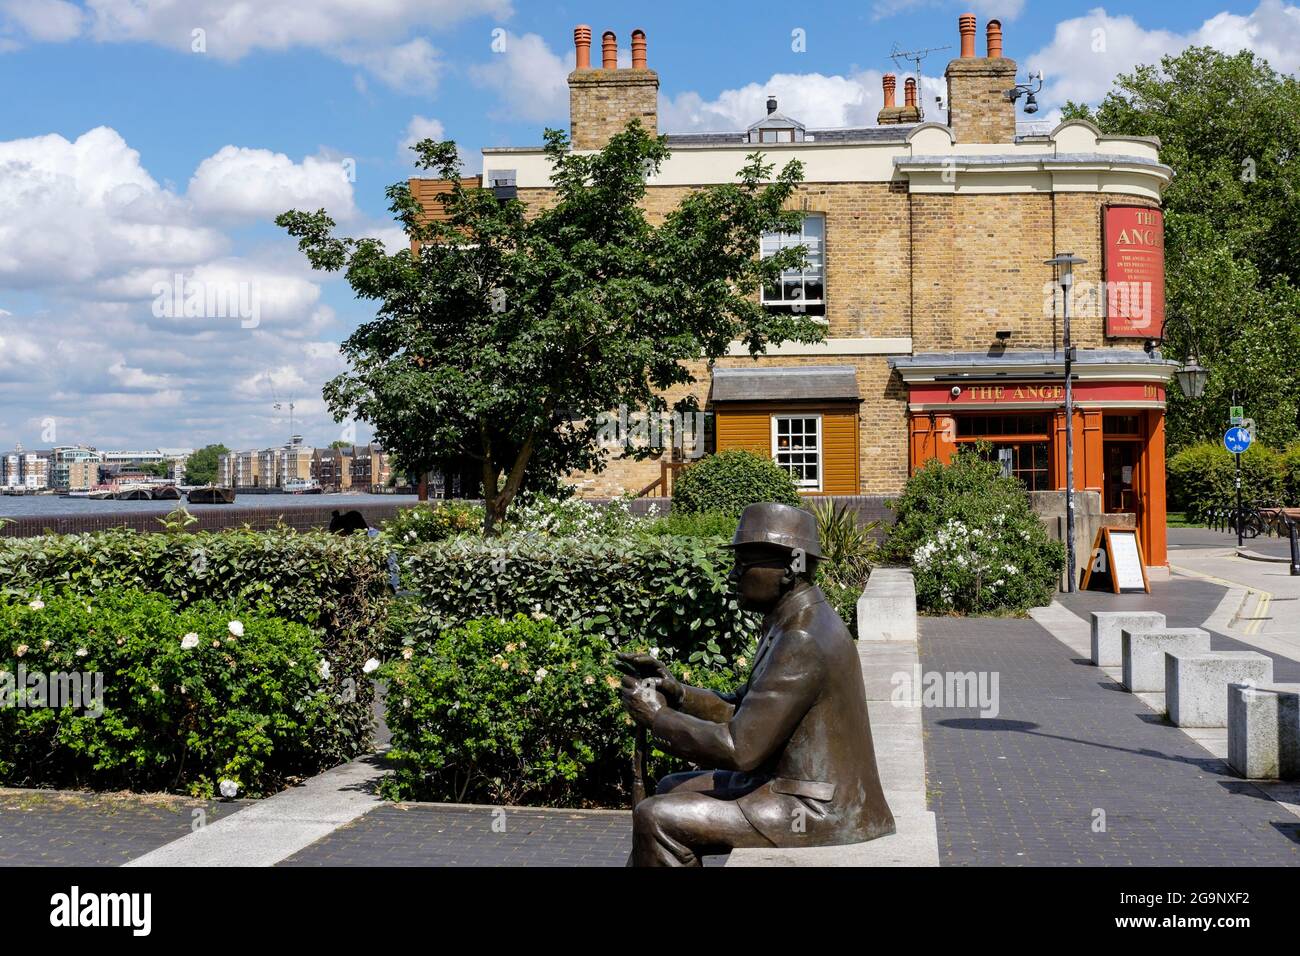 The Angel Historic Riverside Pub an der Themse, Rotherhithe, South London, Großbritannien Stockfoto